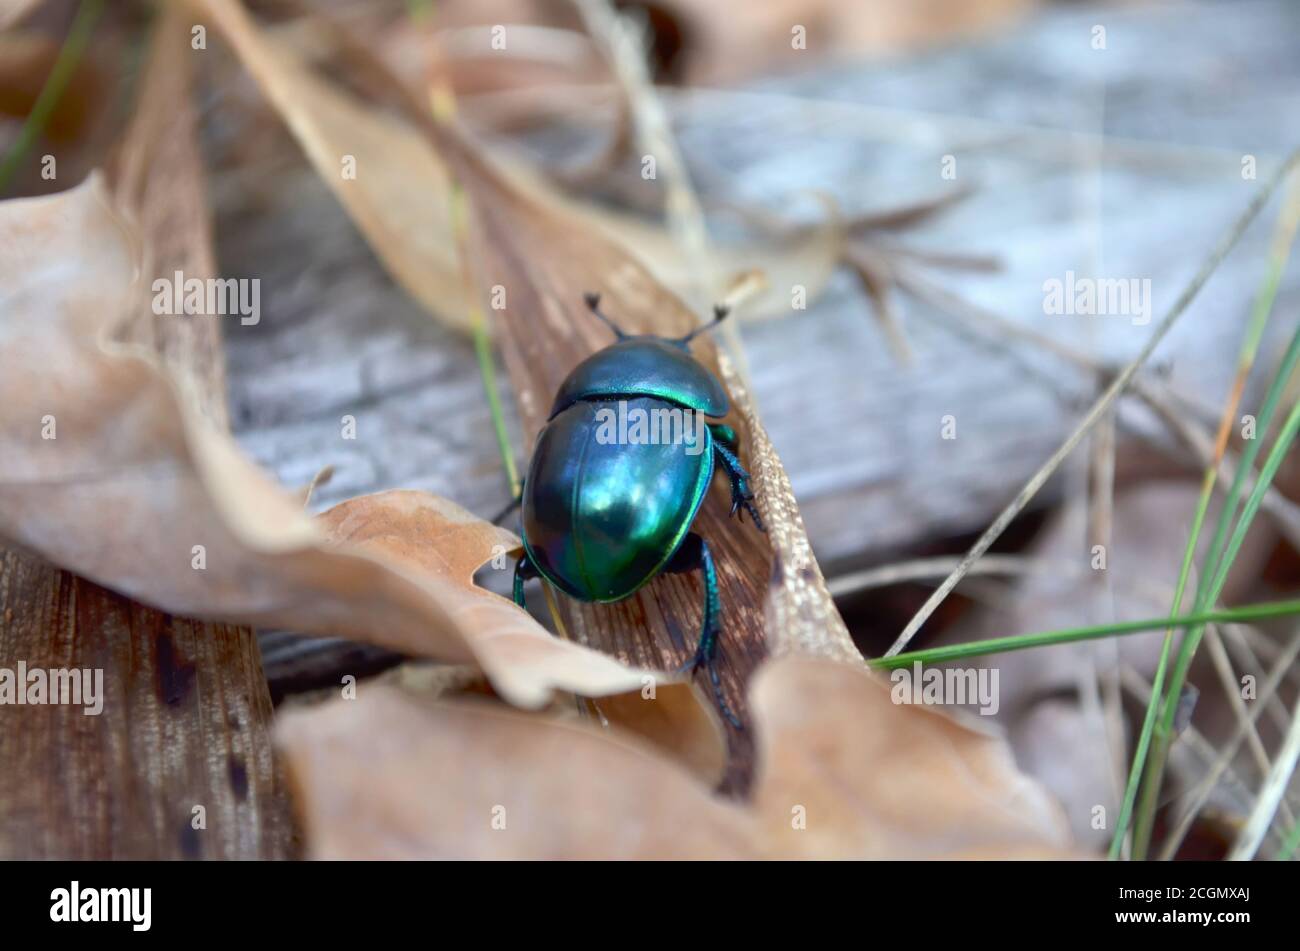 Trypocopris vernalis crawling on the dry fallen leaves in the forest. Fauna of Ukraine. Shallow depth of field, closeup. Stock Photo